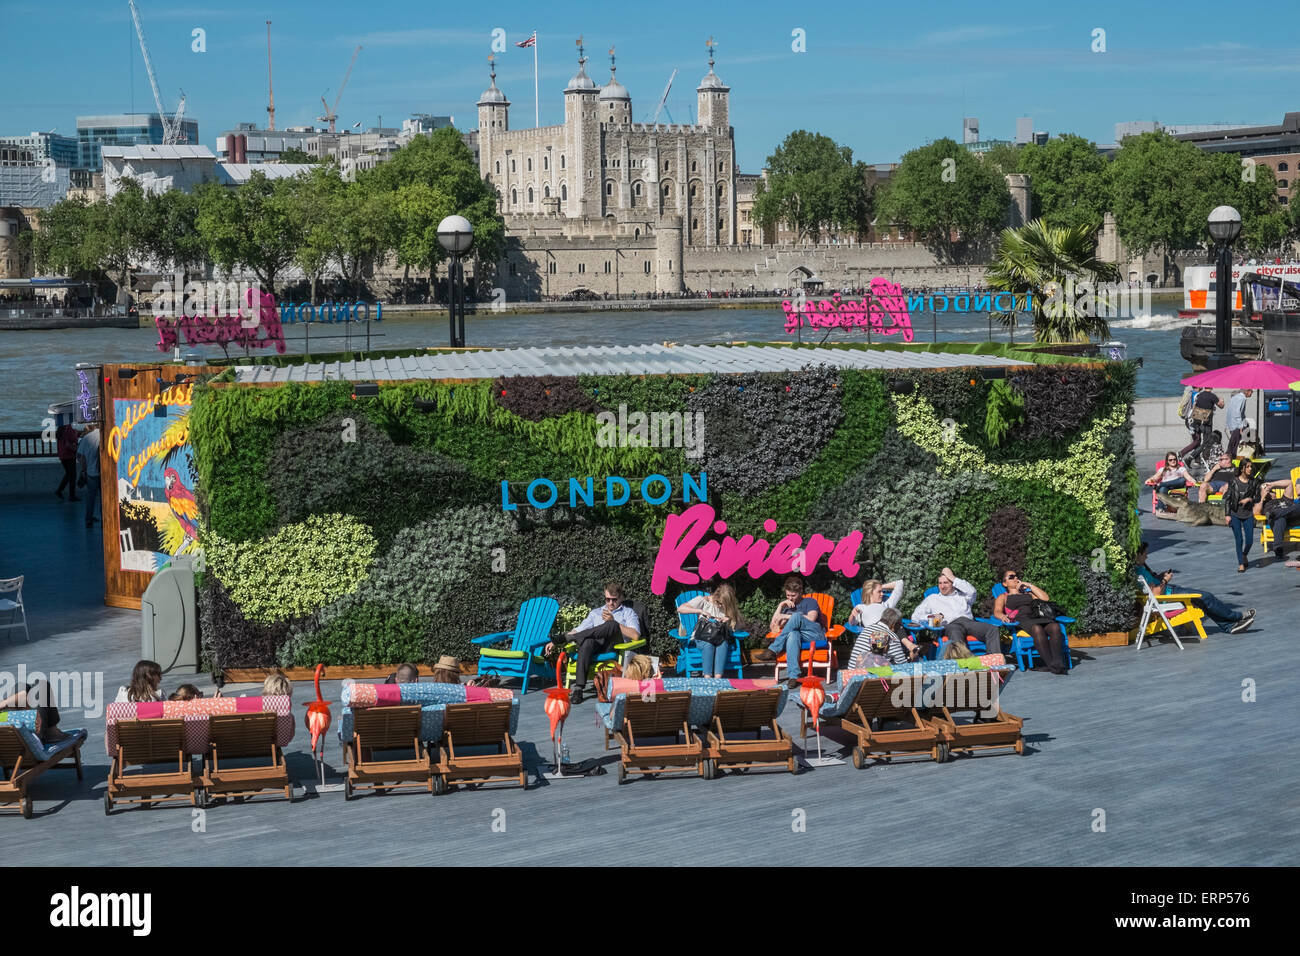 People relaxing in sunshine at London Riviera popup restaurant, with iconic Tower of London in background, Southbank, UK Stock Photo